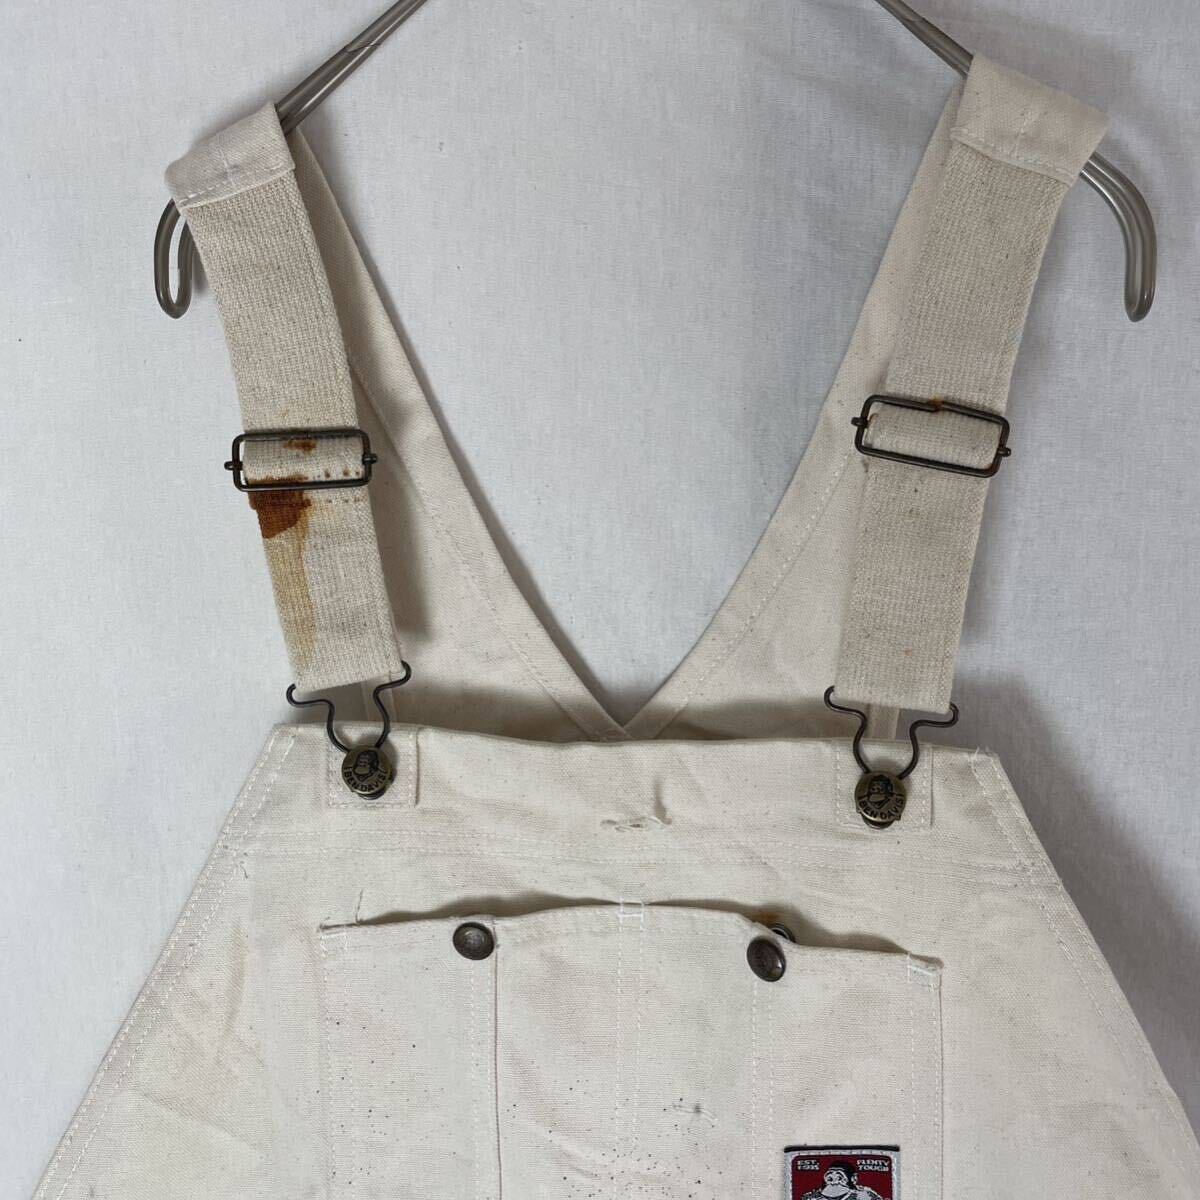  Ben tei screw Duck overall apron attaching old clothes 44 -inch ivory WORKWEAR overall 